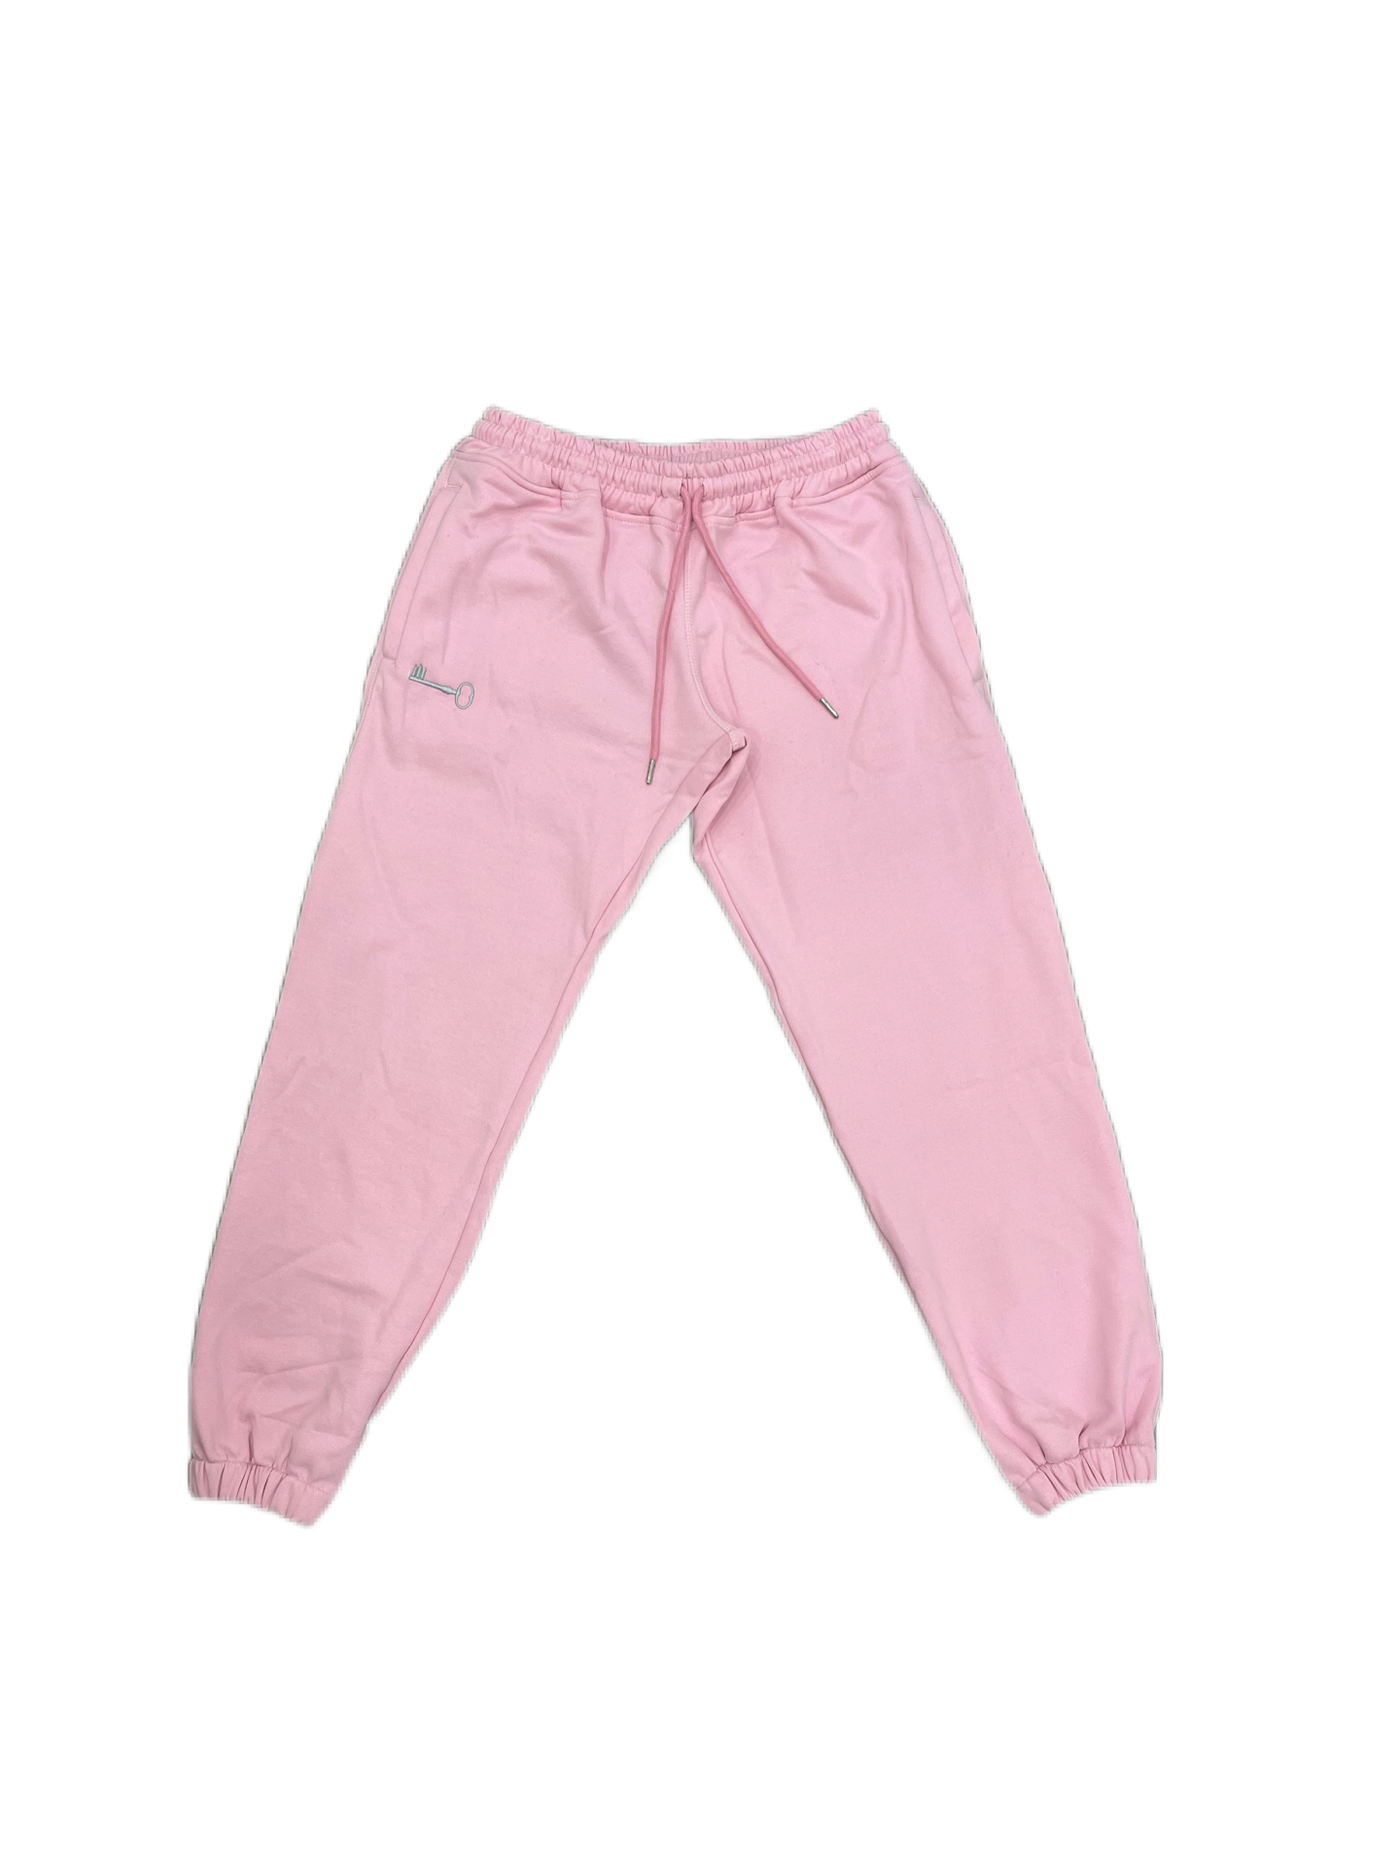 The Pastel House Sweatpants Pink